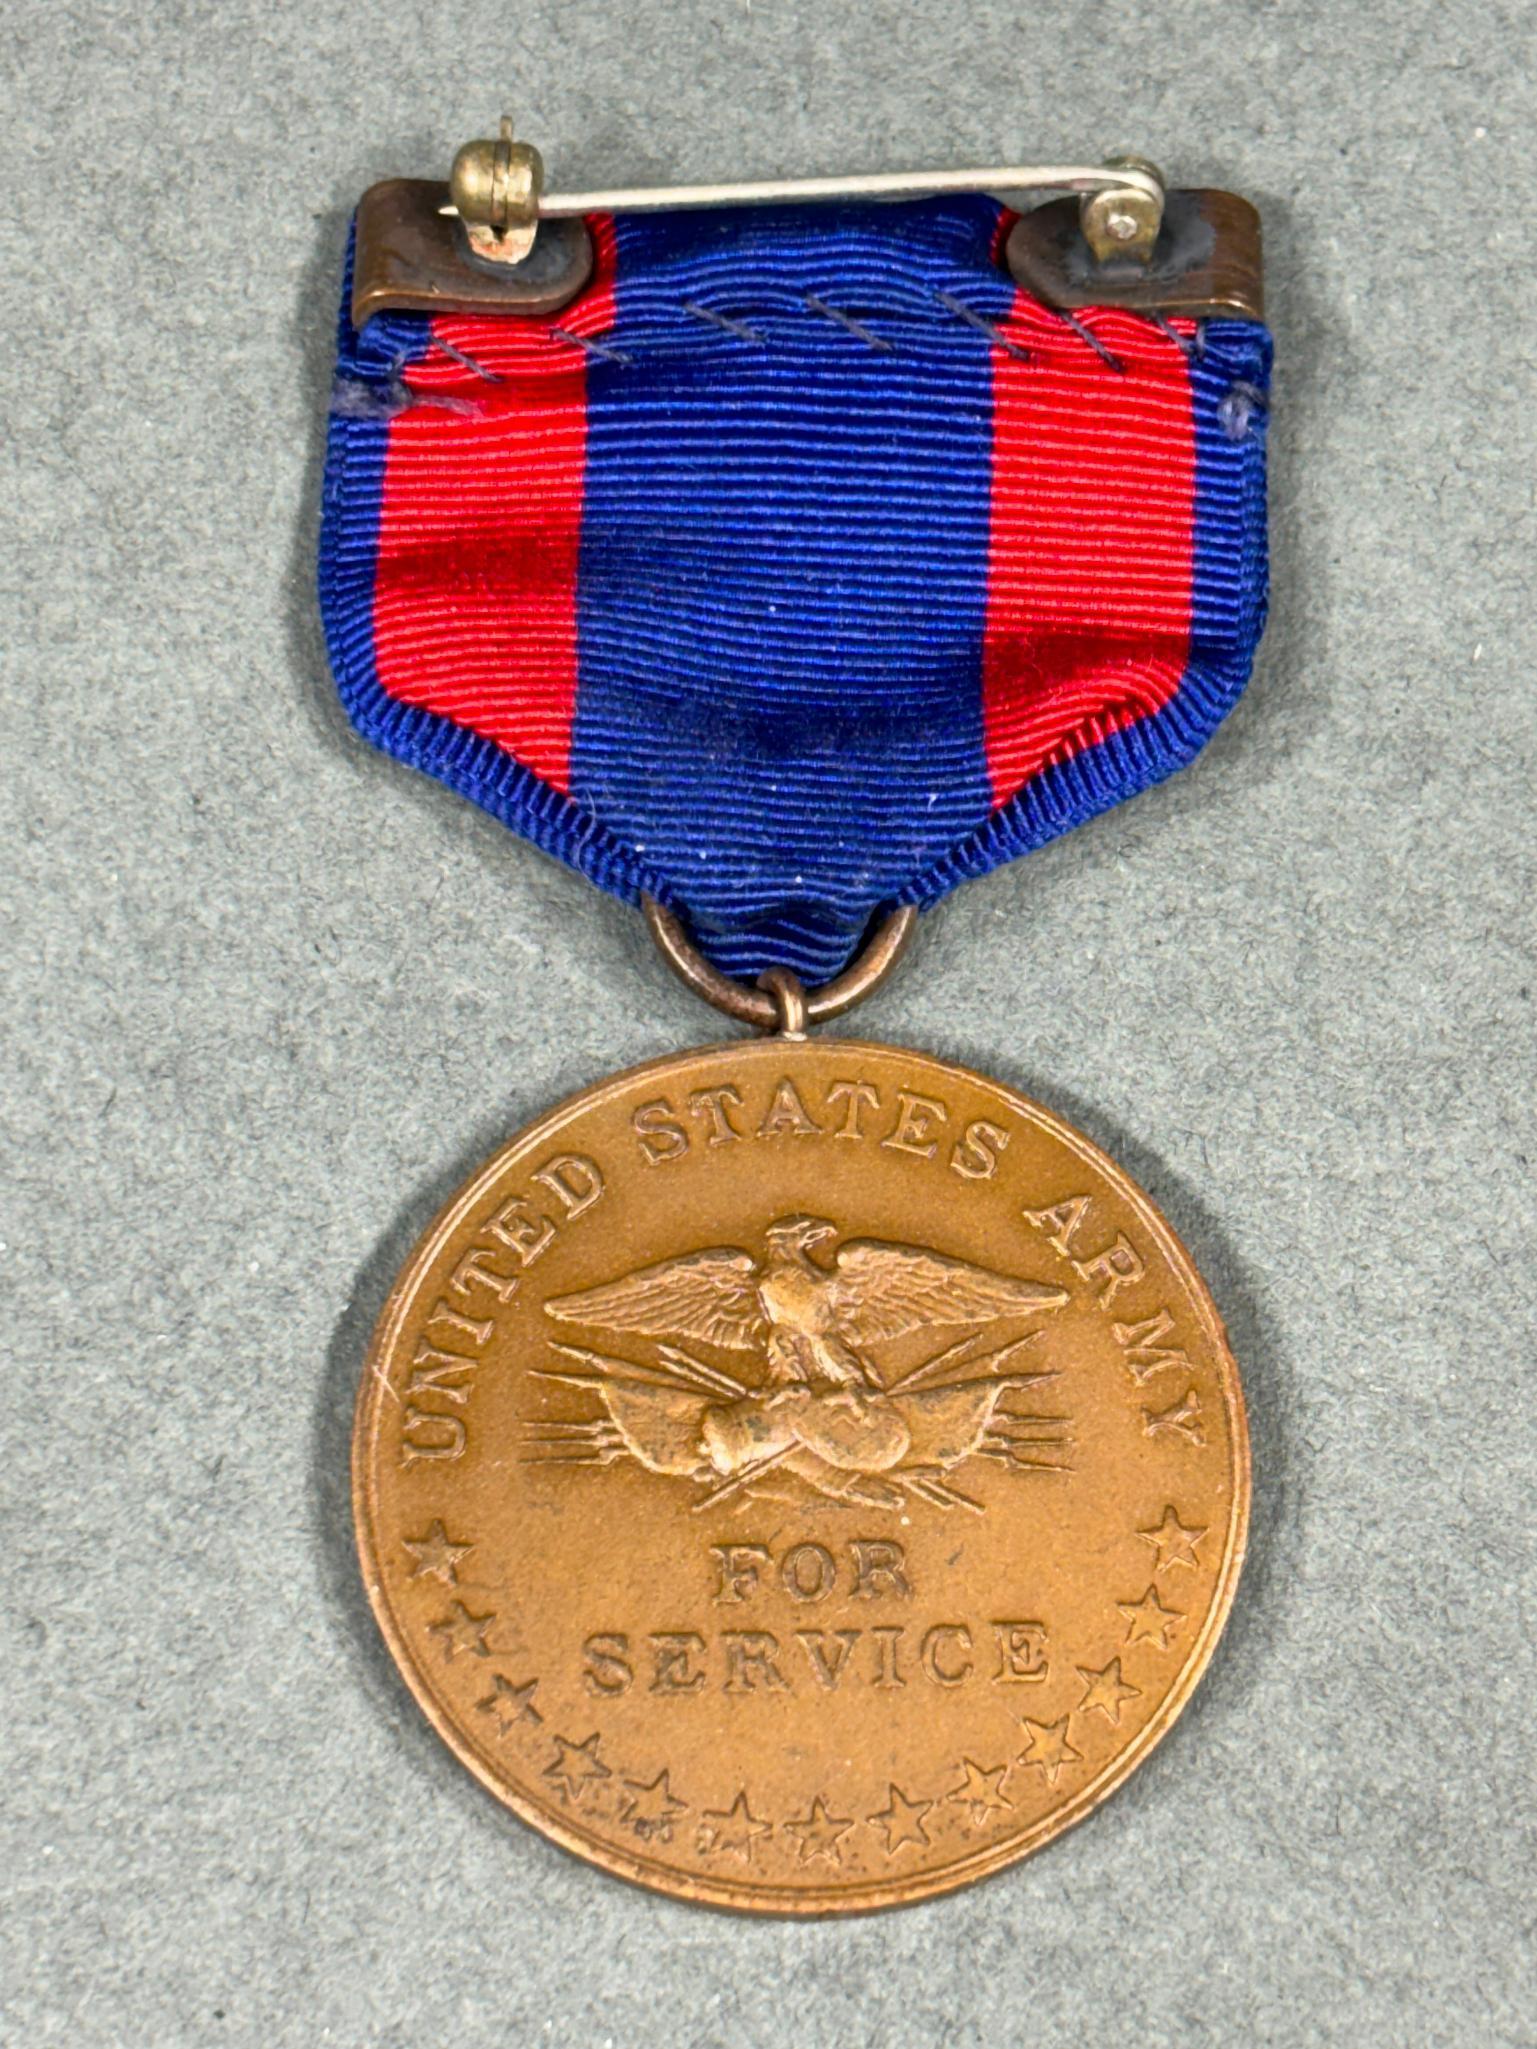 PHILIPPINE INSURRECTION NUMBERED MEDAL